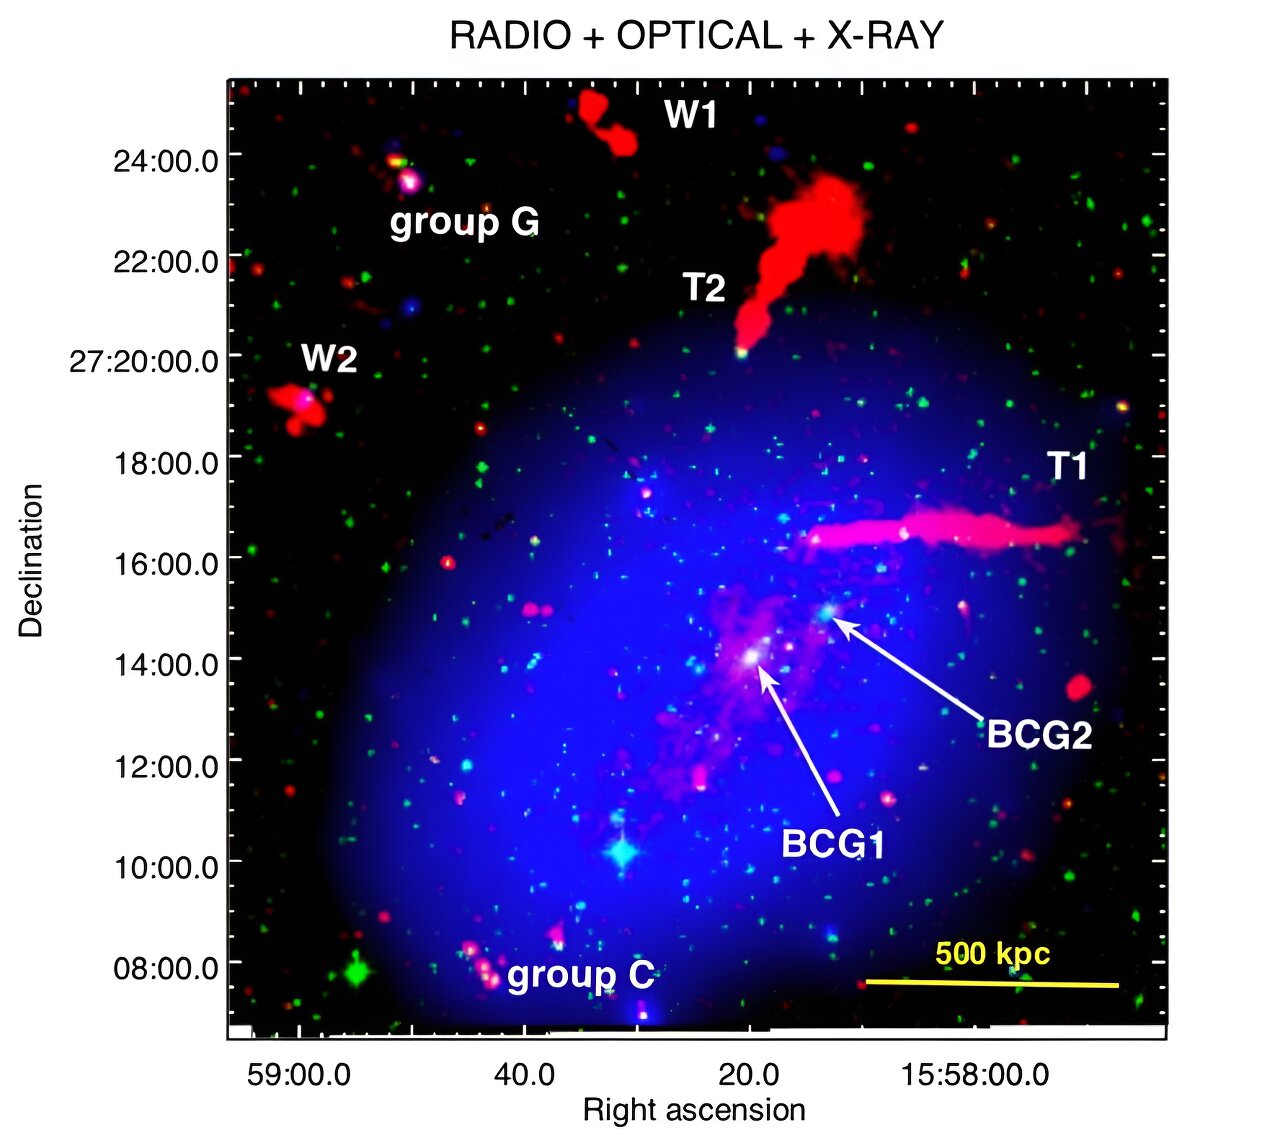 European astronomers detect new component of radio halo in a nearby galaxy  cluster